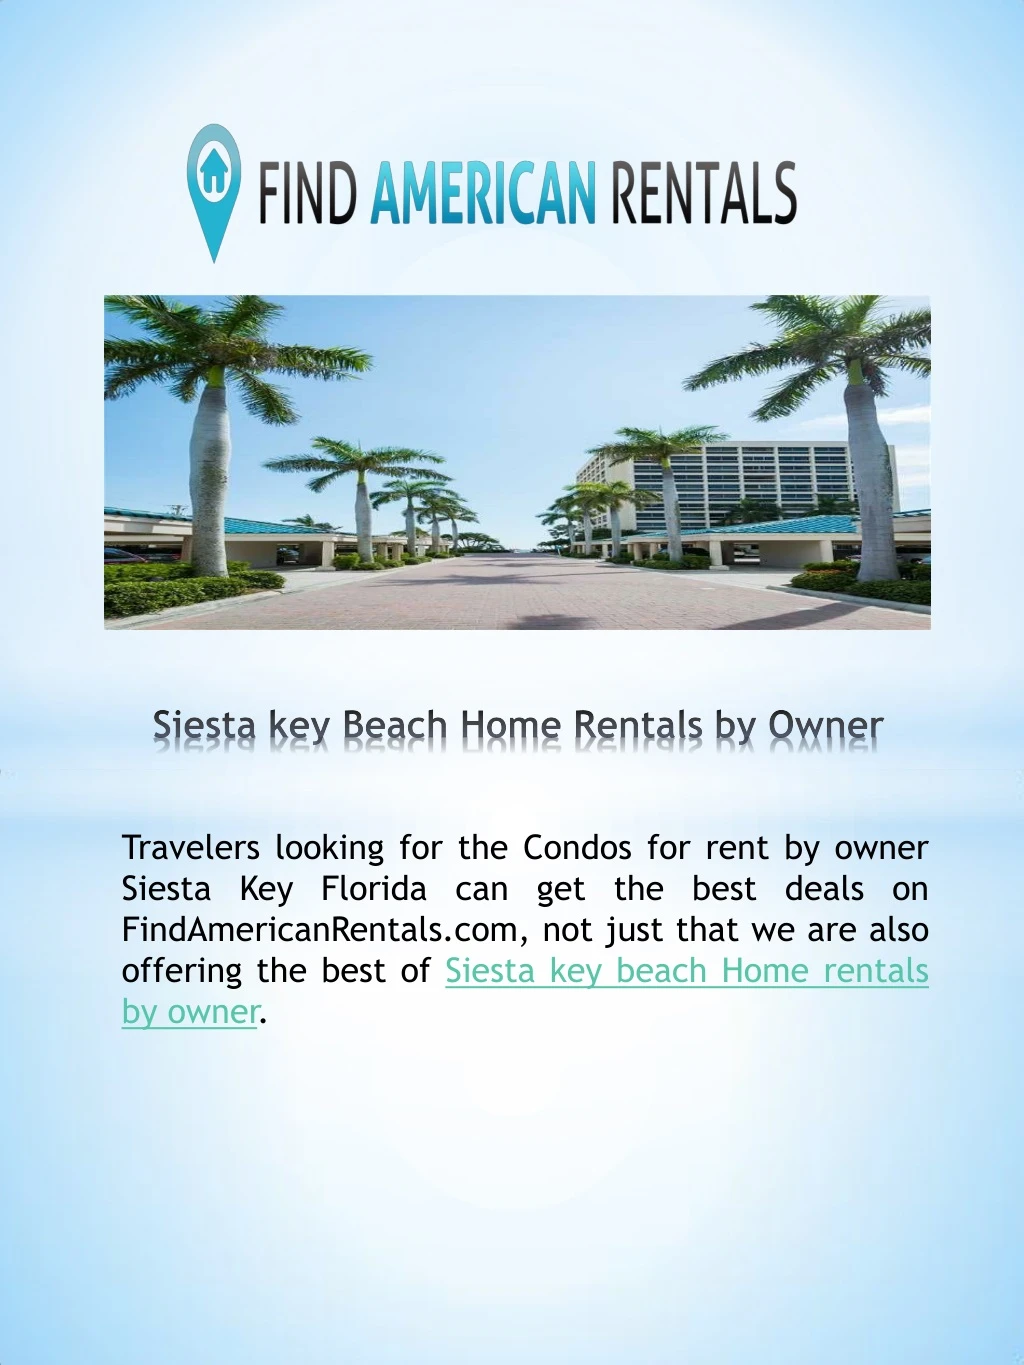 travelers looking for the condos for rent n.